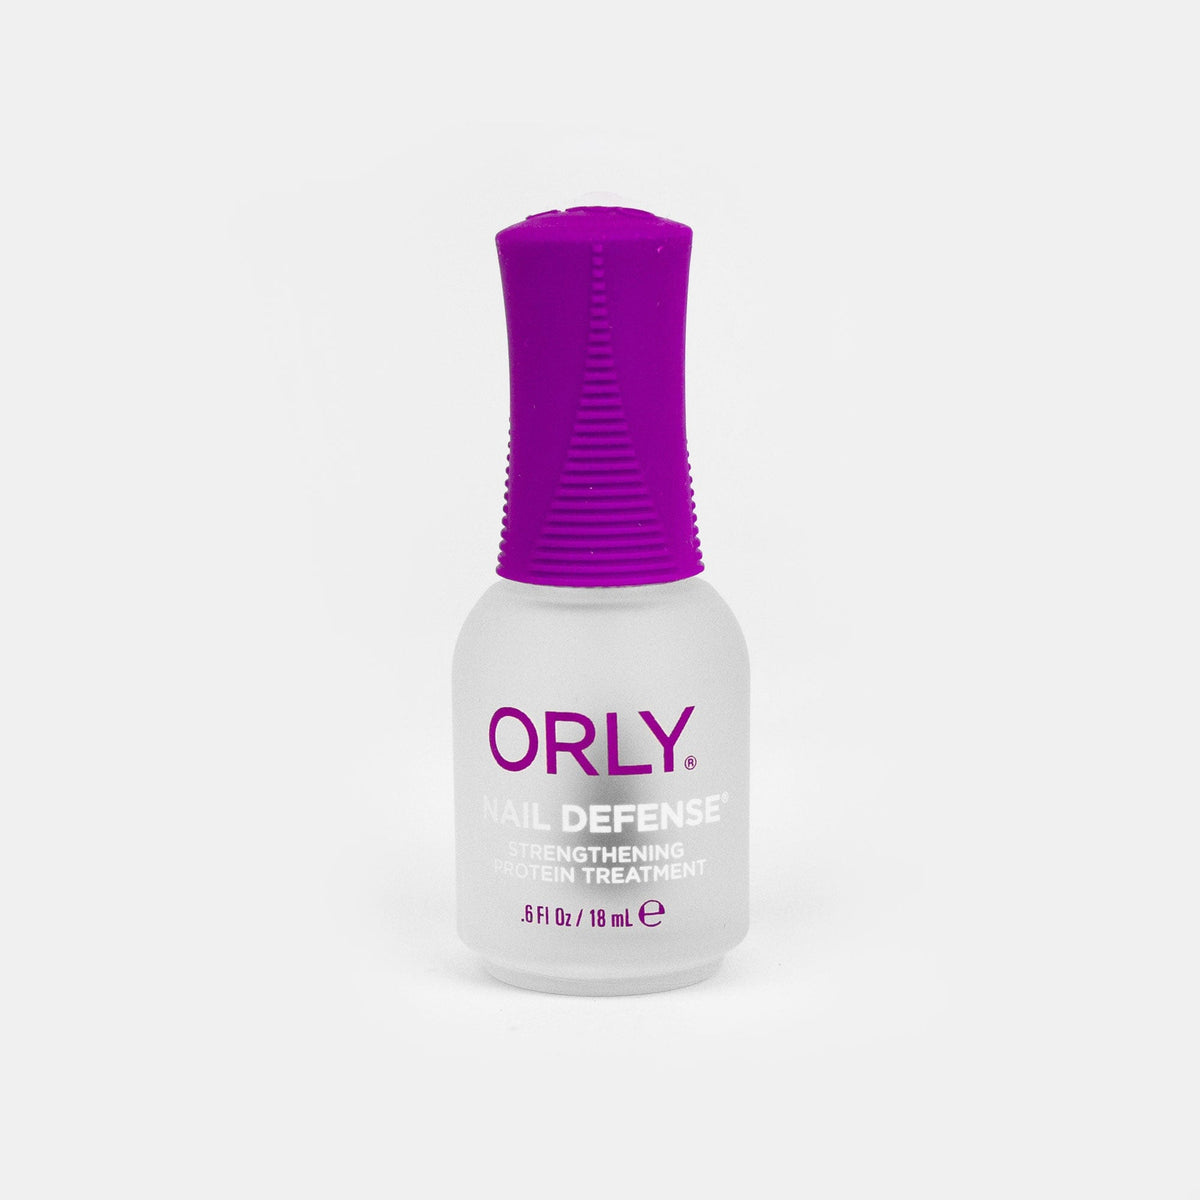 Orly Nail Defense 18mL product photo - photographed in New Zealand